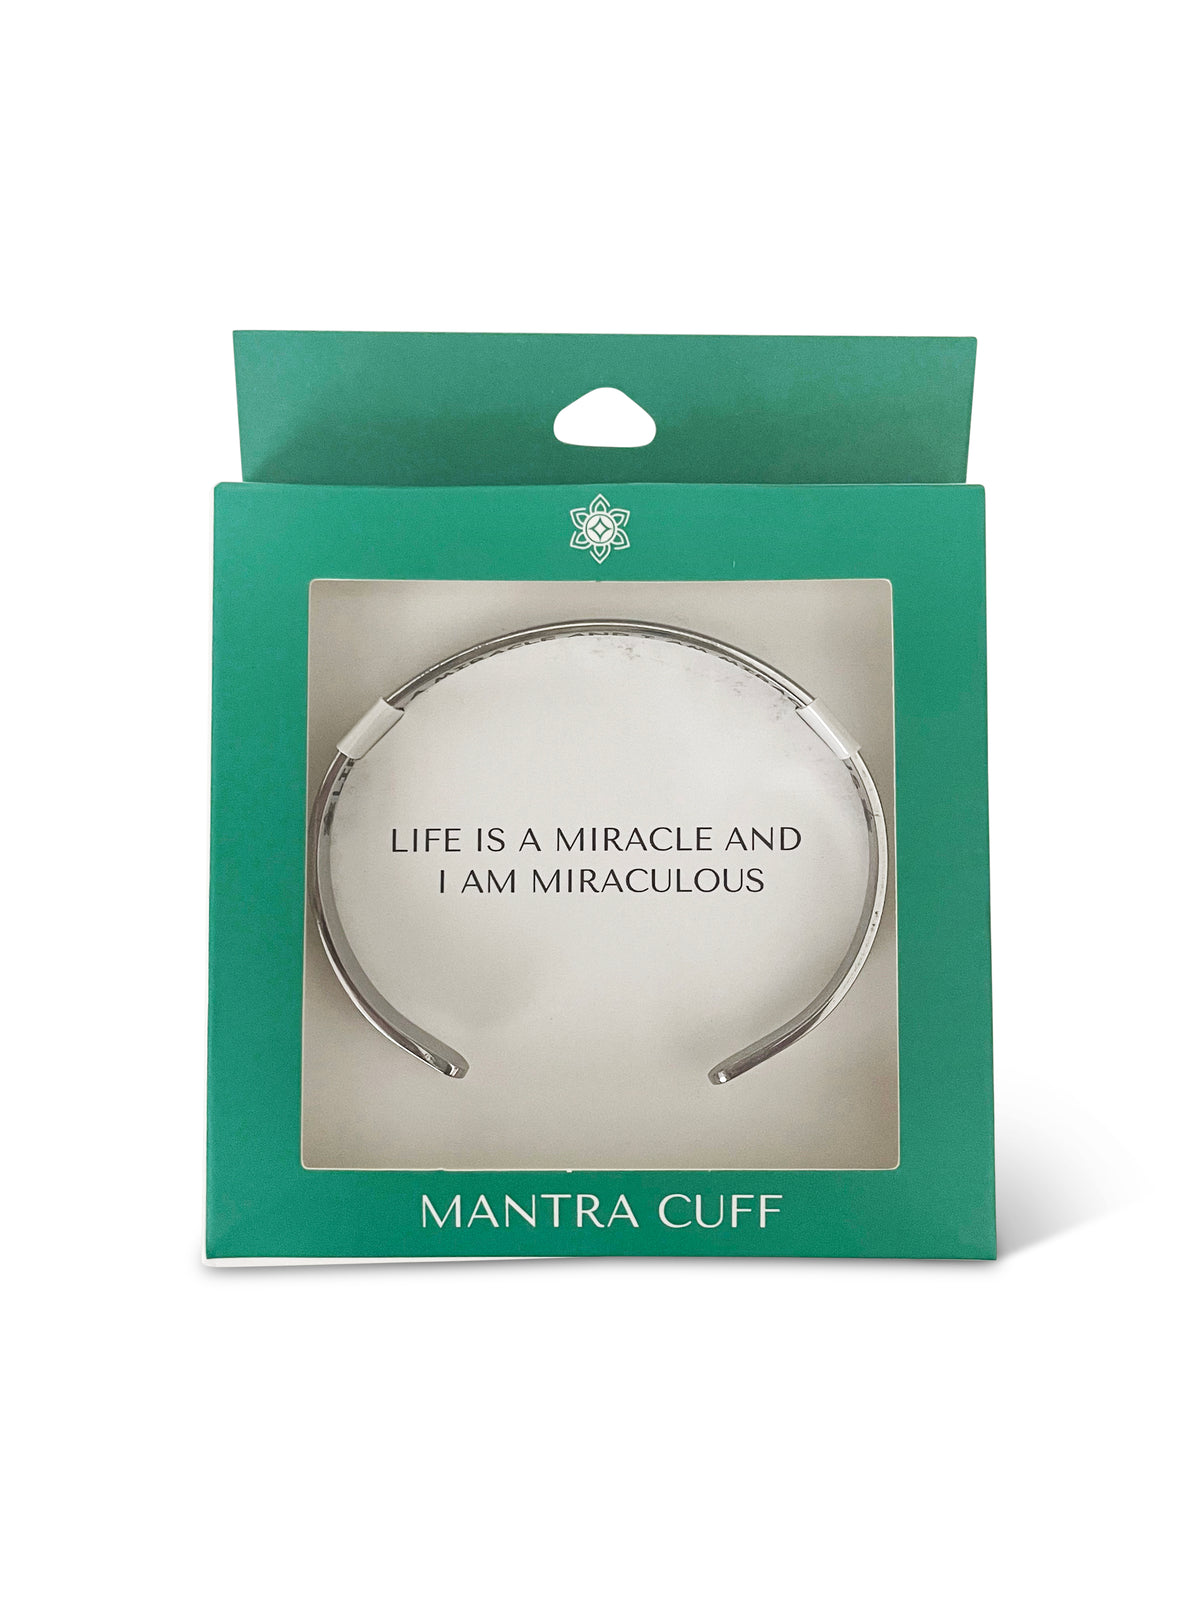 Life is a Miracle and I Am Miraculous (Mantra Cuff)